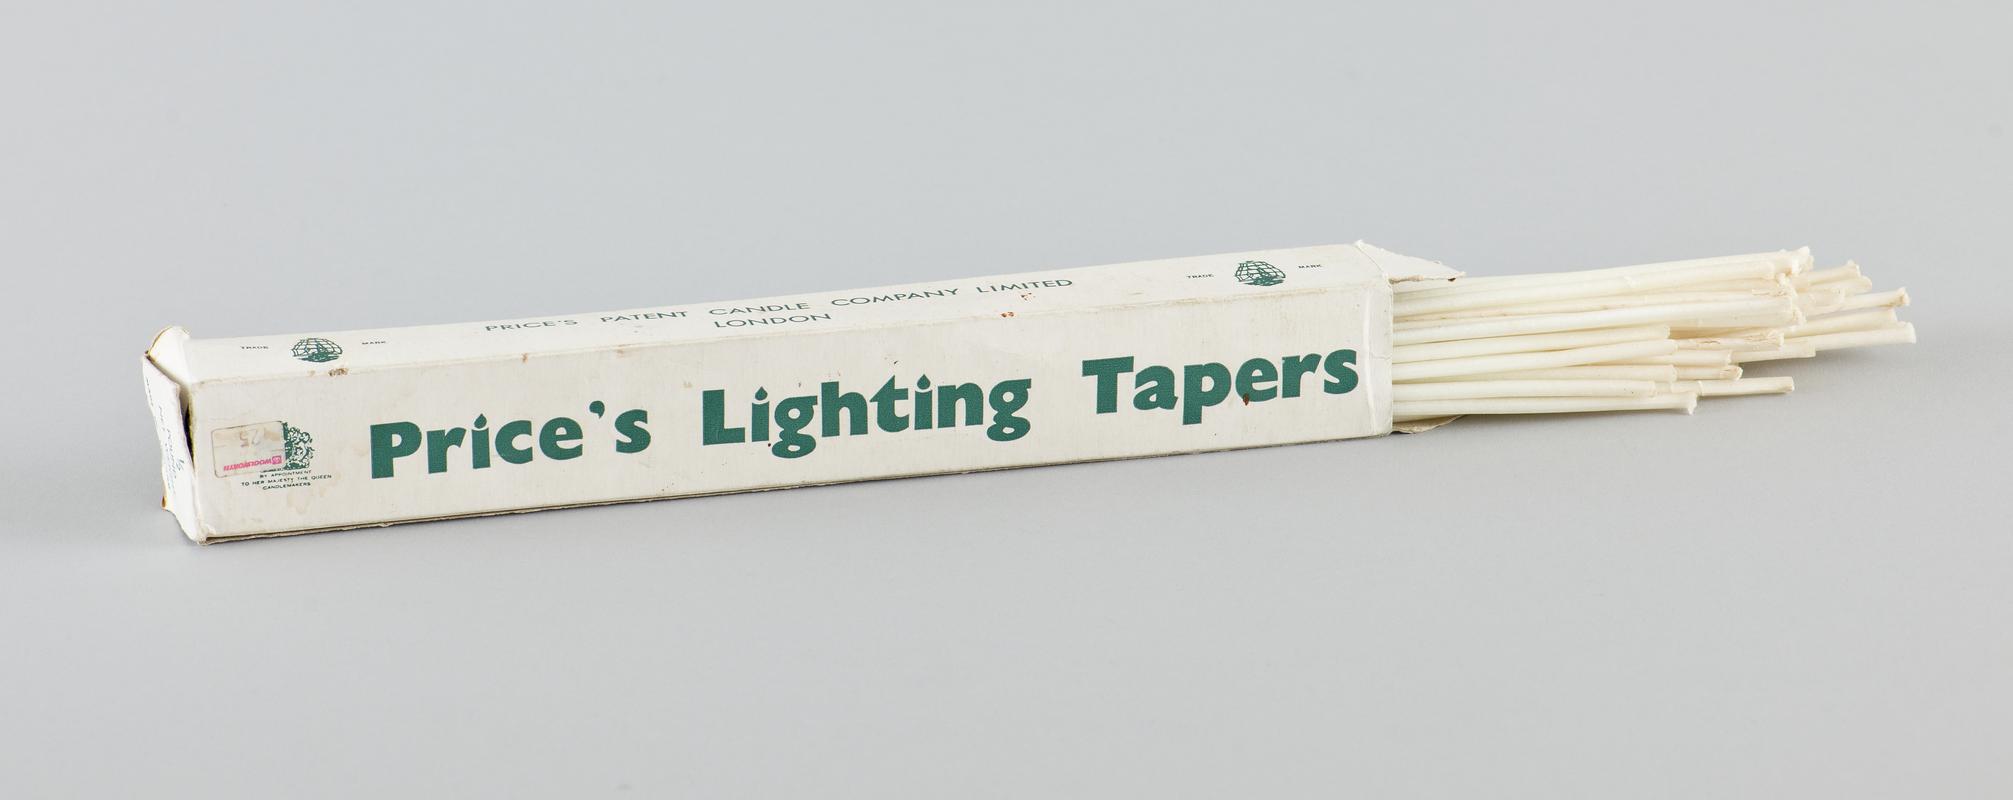 Half pound box of &#039;Prices&#039; wax lighting tapers in original card box. White card with green printed branding, well worn with flap missing from one end. Some of the wax tapers have been removed from box, which is about 75% full.